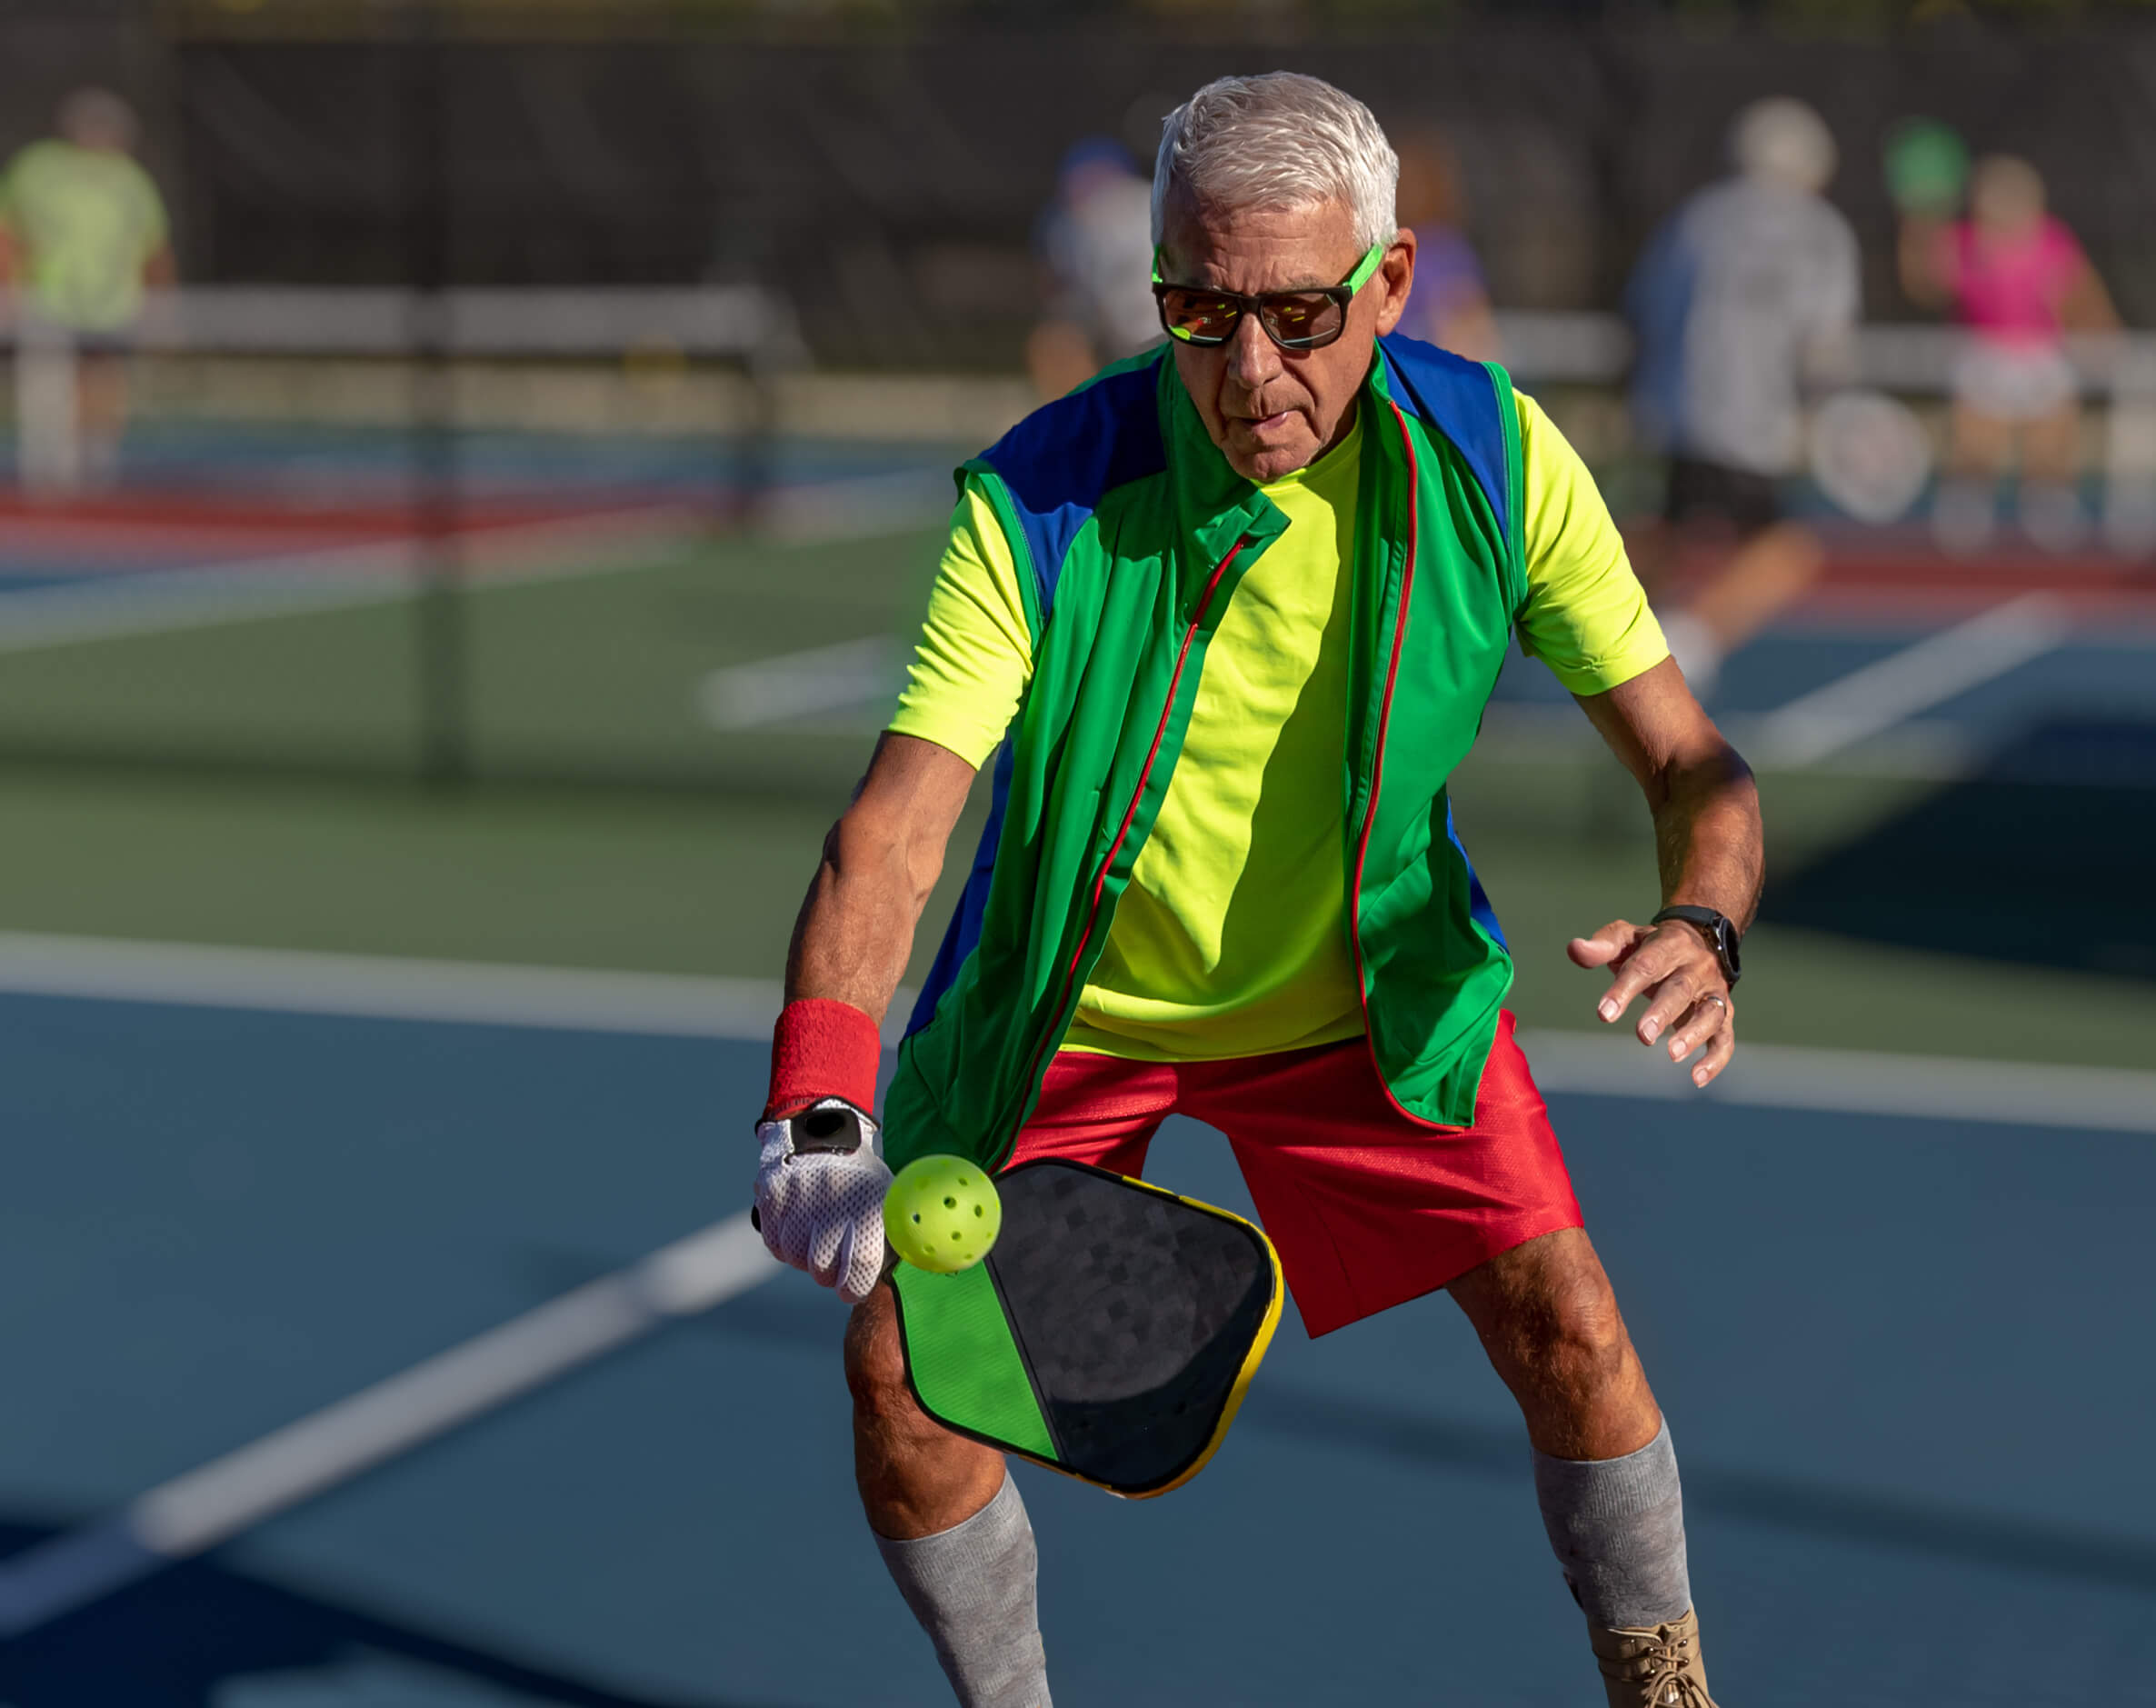 Older man in sunglasses playing pickleball.